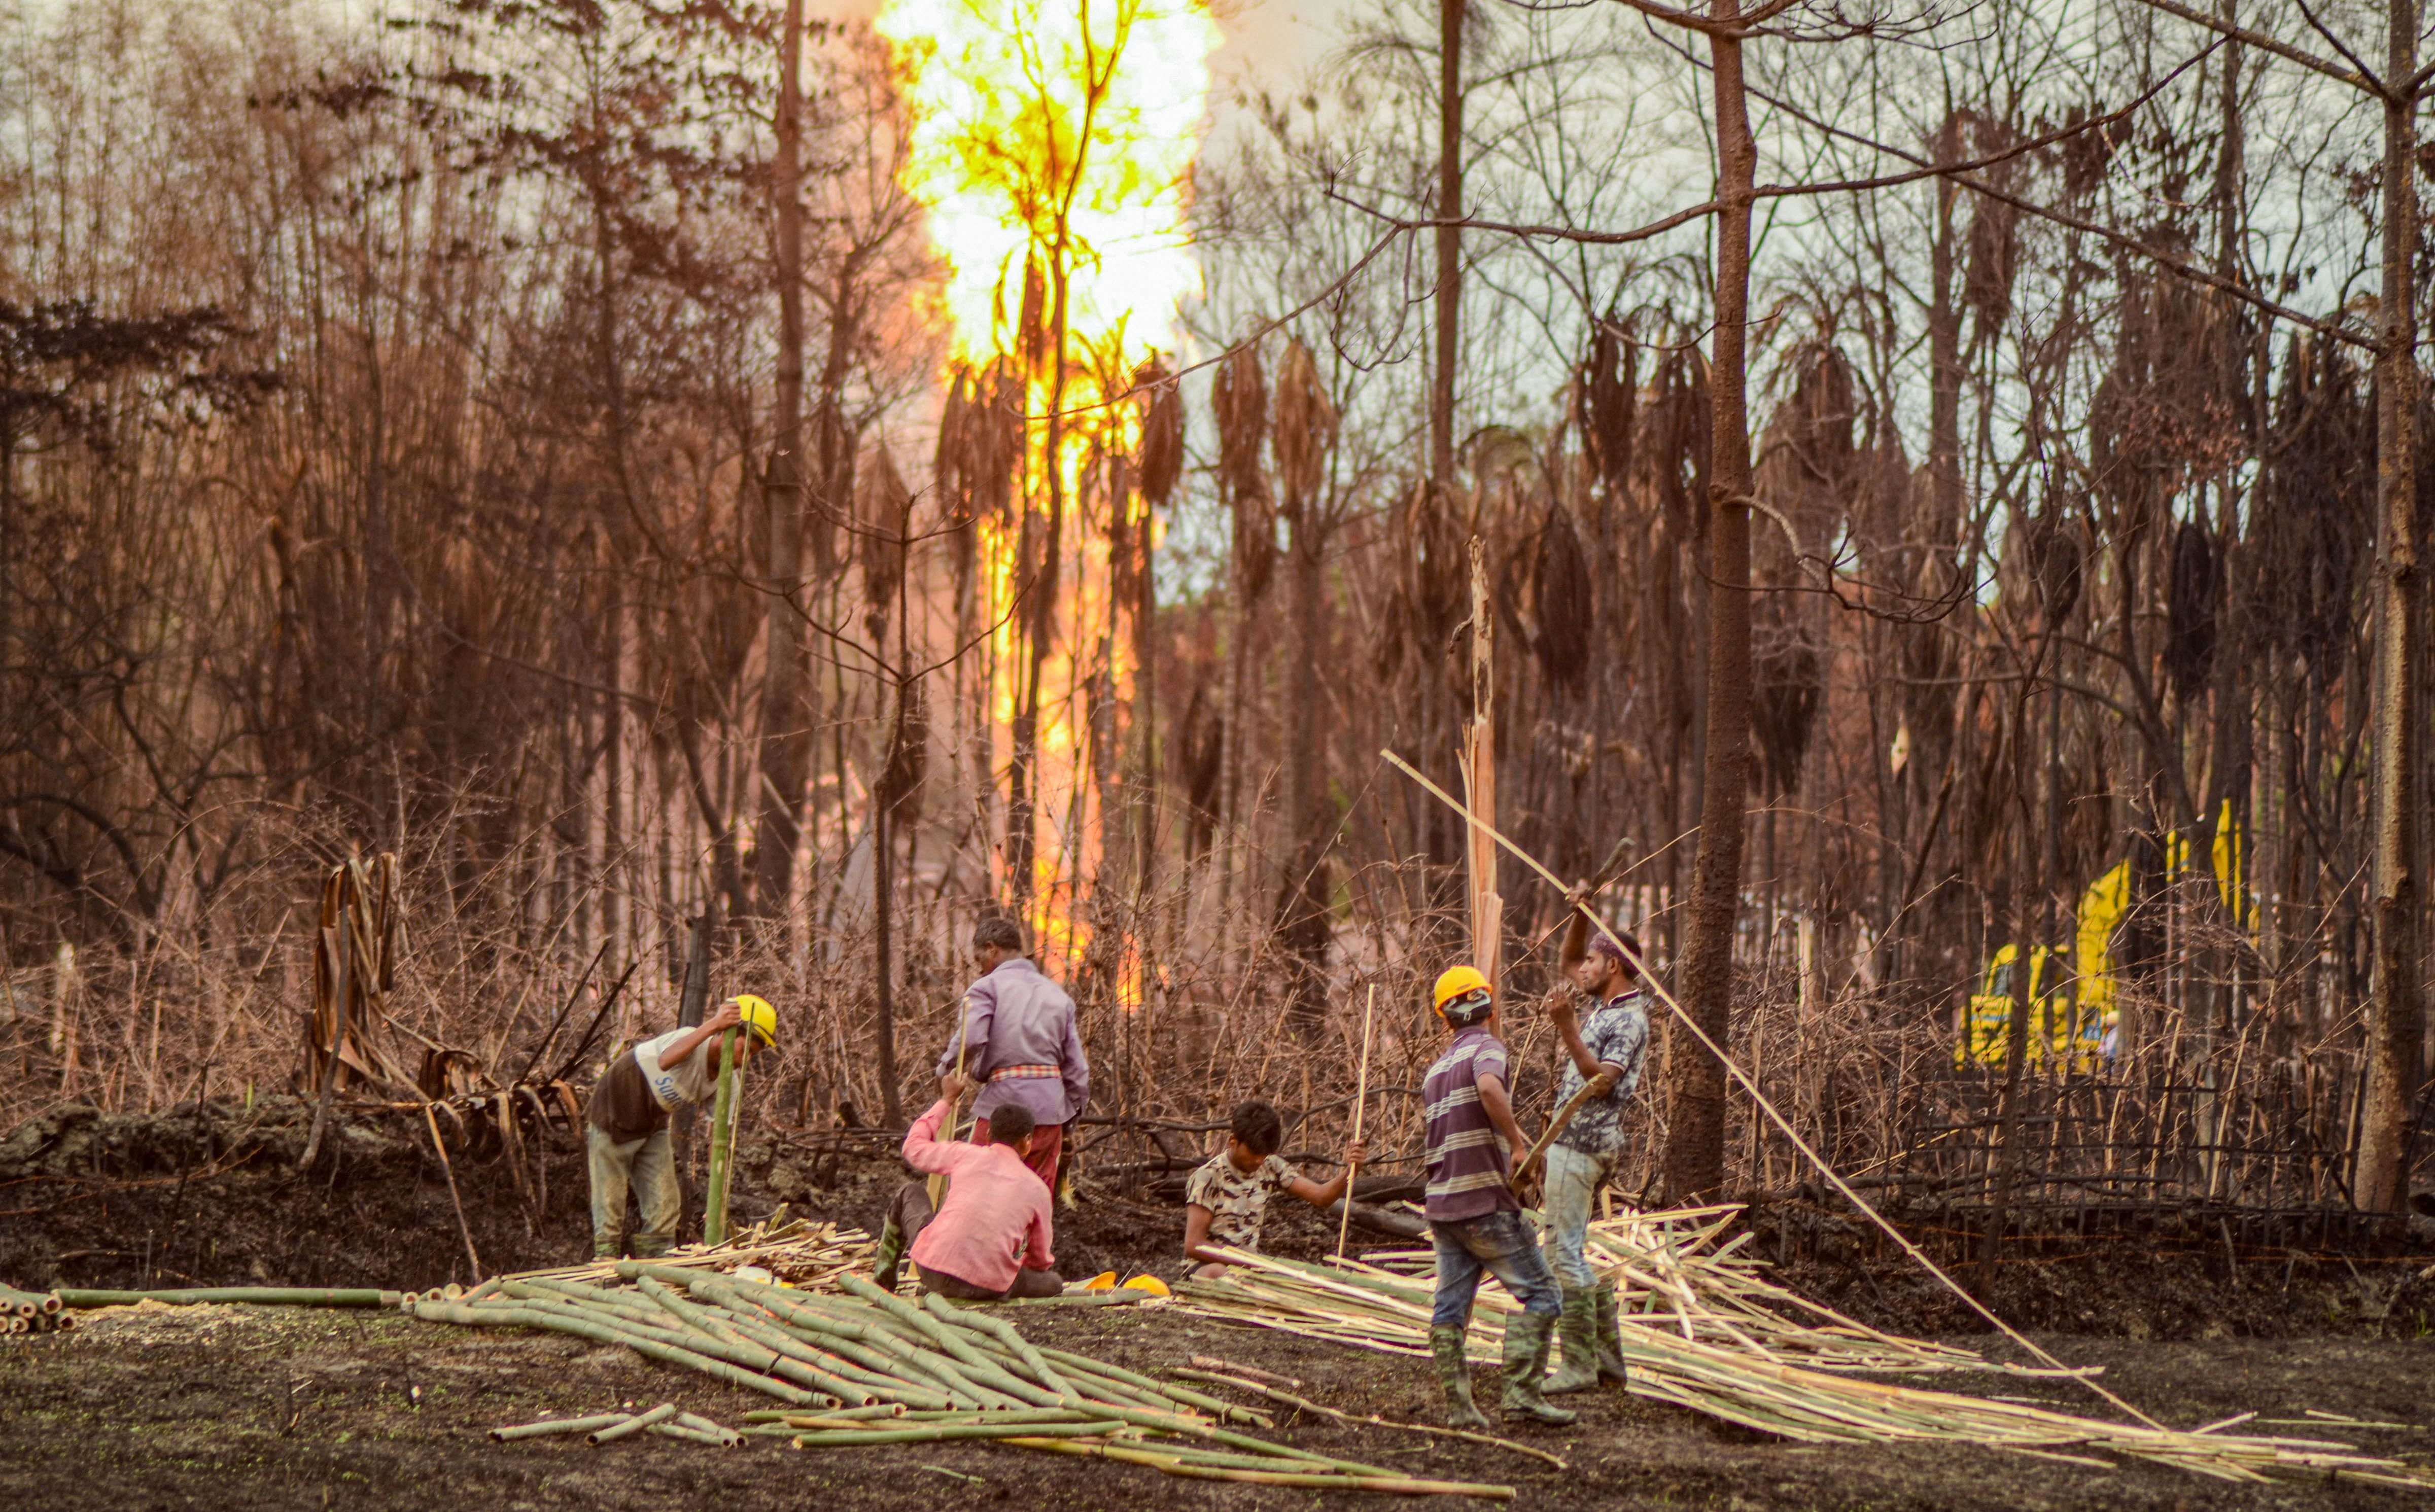 Workers build a structure near the gas well blowout site, during the ongoing COVID-19 nationwide lockdown, in Tinsukia district, Tuesday, June 16, 2020. (PTI Photo)